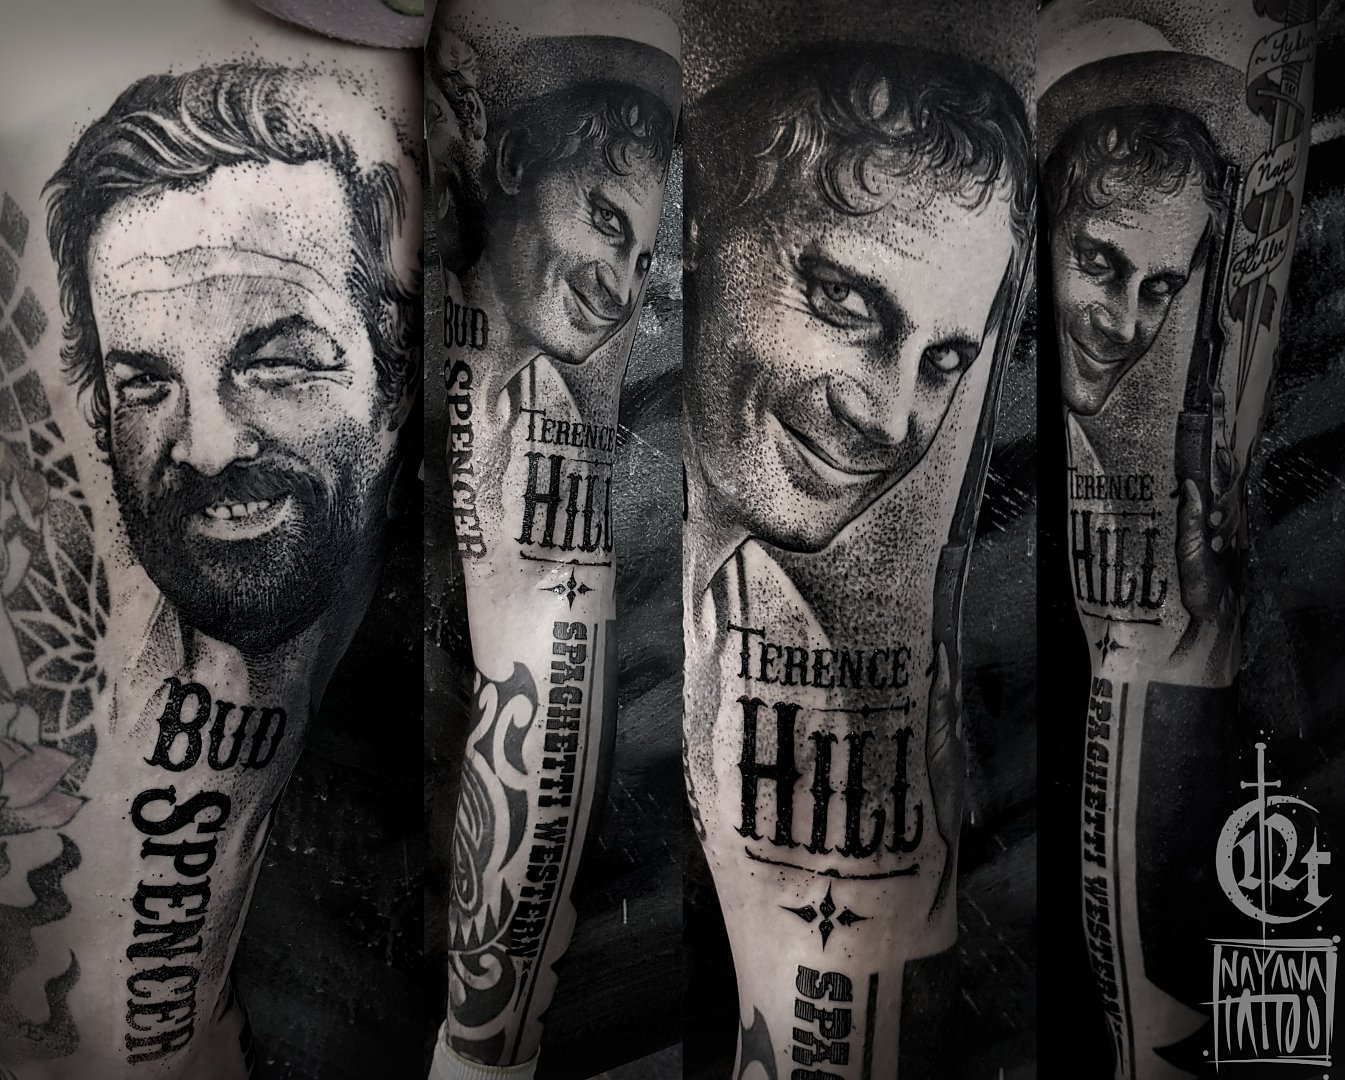 bud-spencer-terence-hill-tattoo